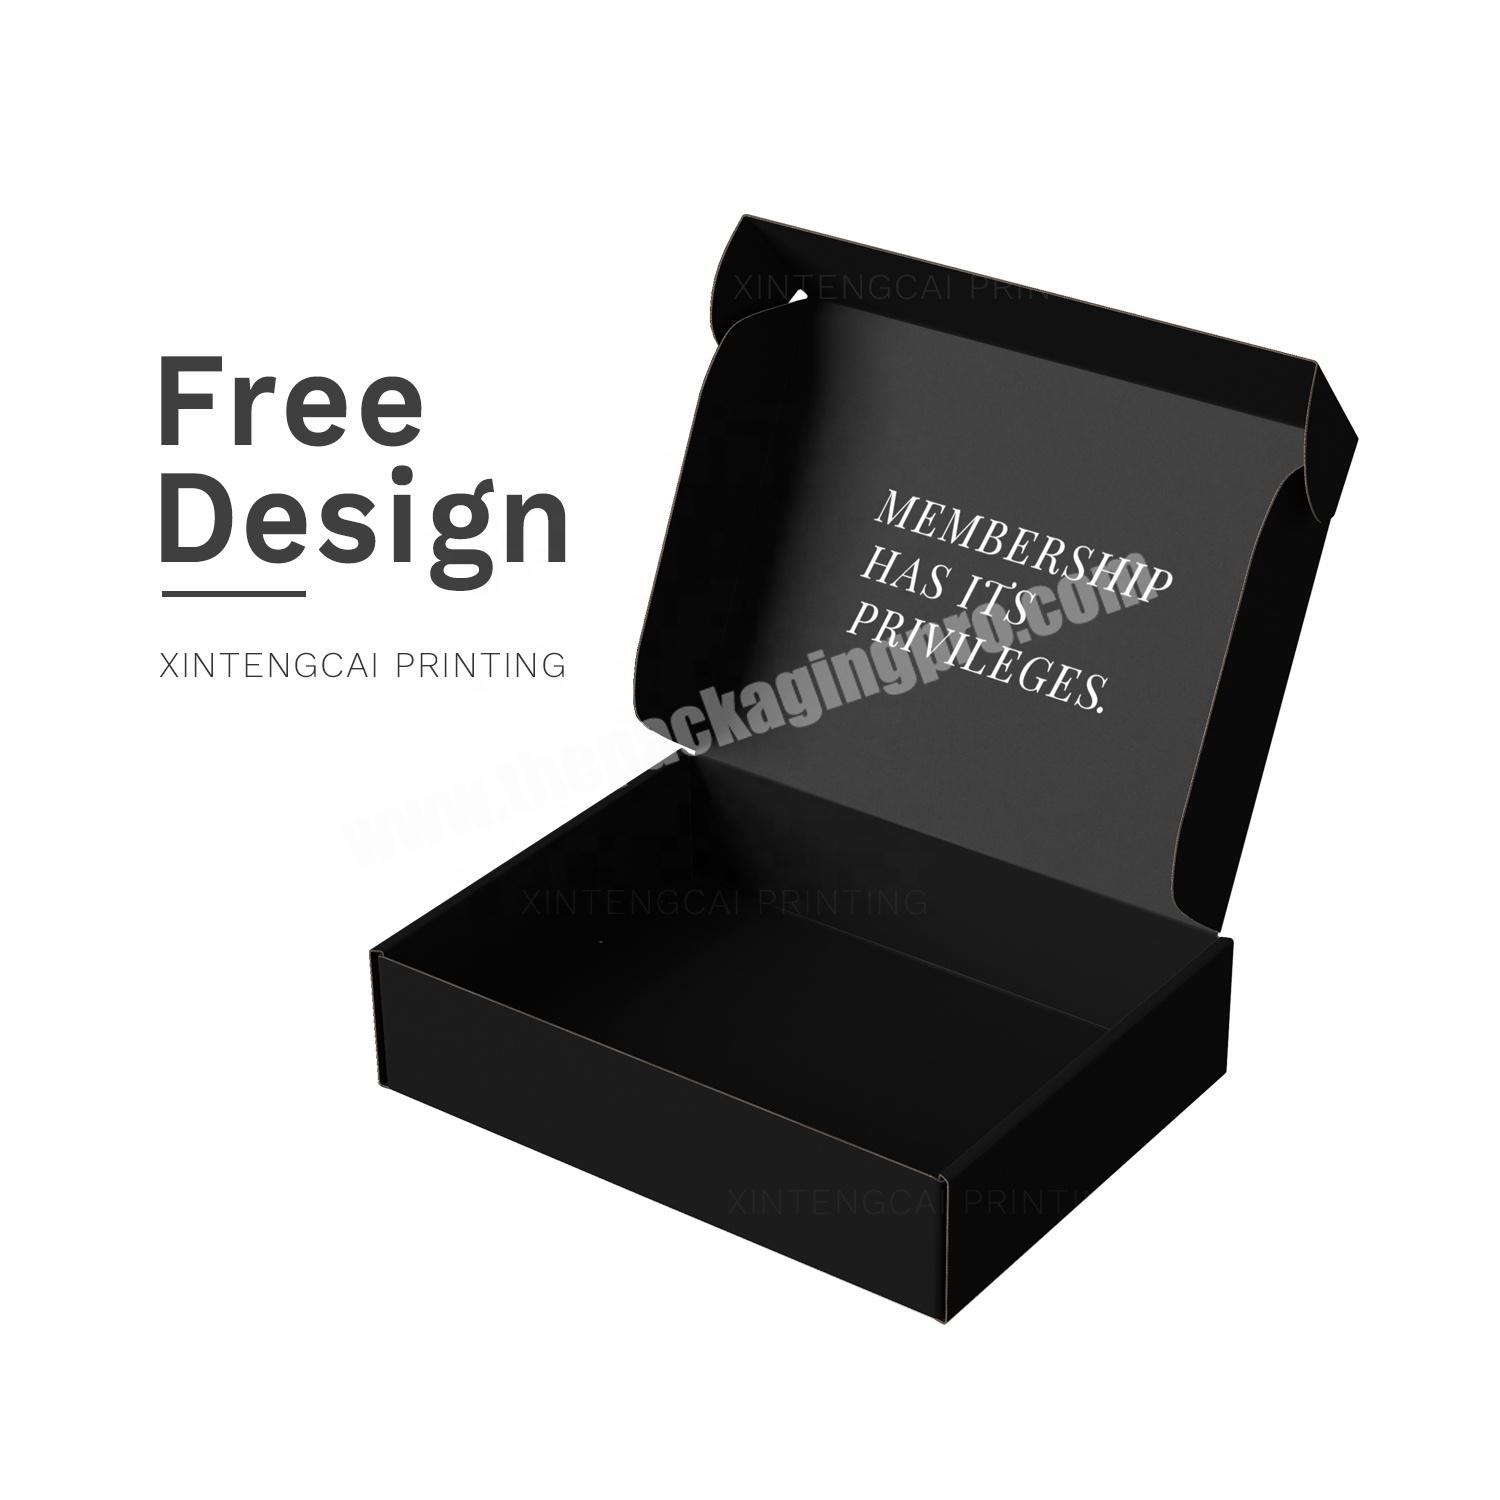 Free Design Custom Black Mailer Box for Jewelry  Makeup  Wine  Plus Size Clothing , Sturdy Corrugated Paper Packaging Box